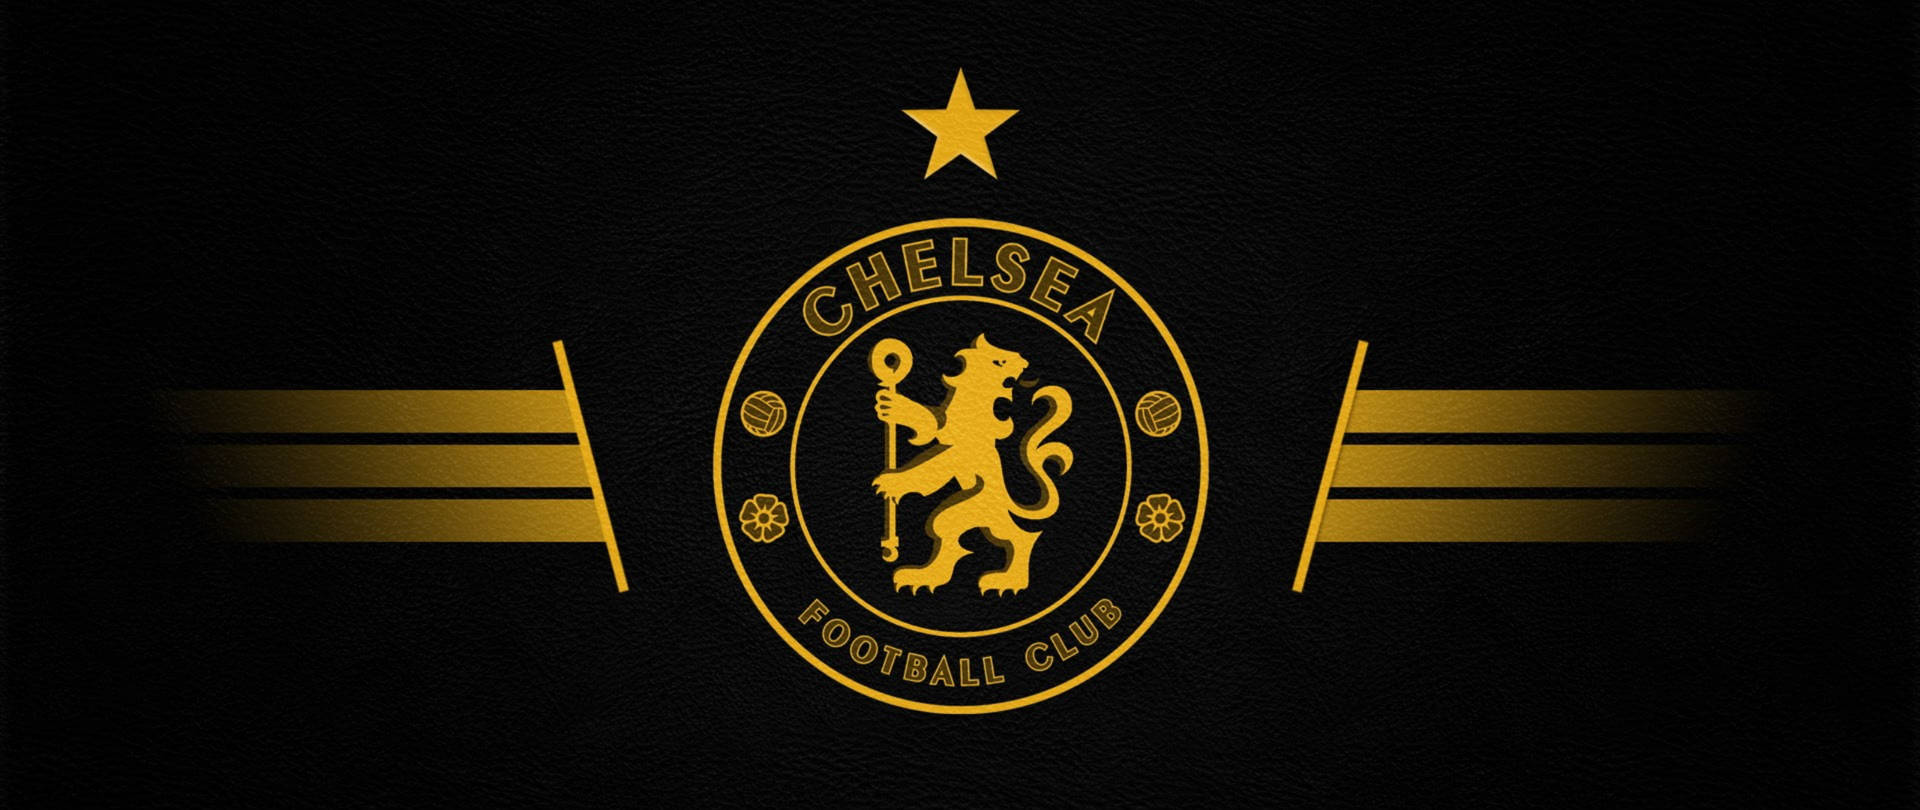 Chelsea Logo With Star Background